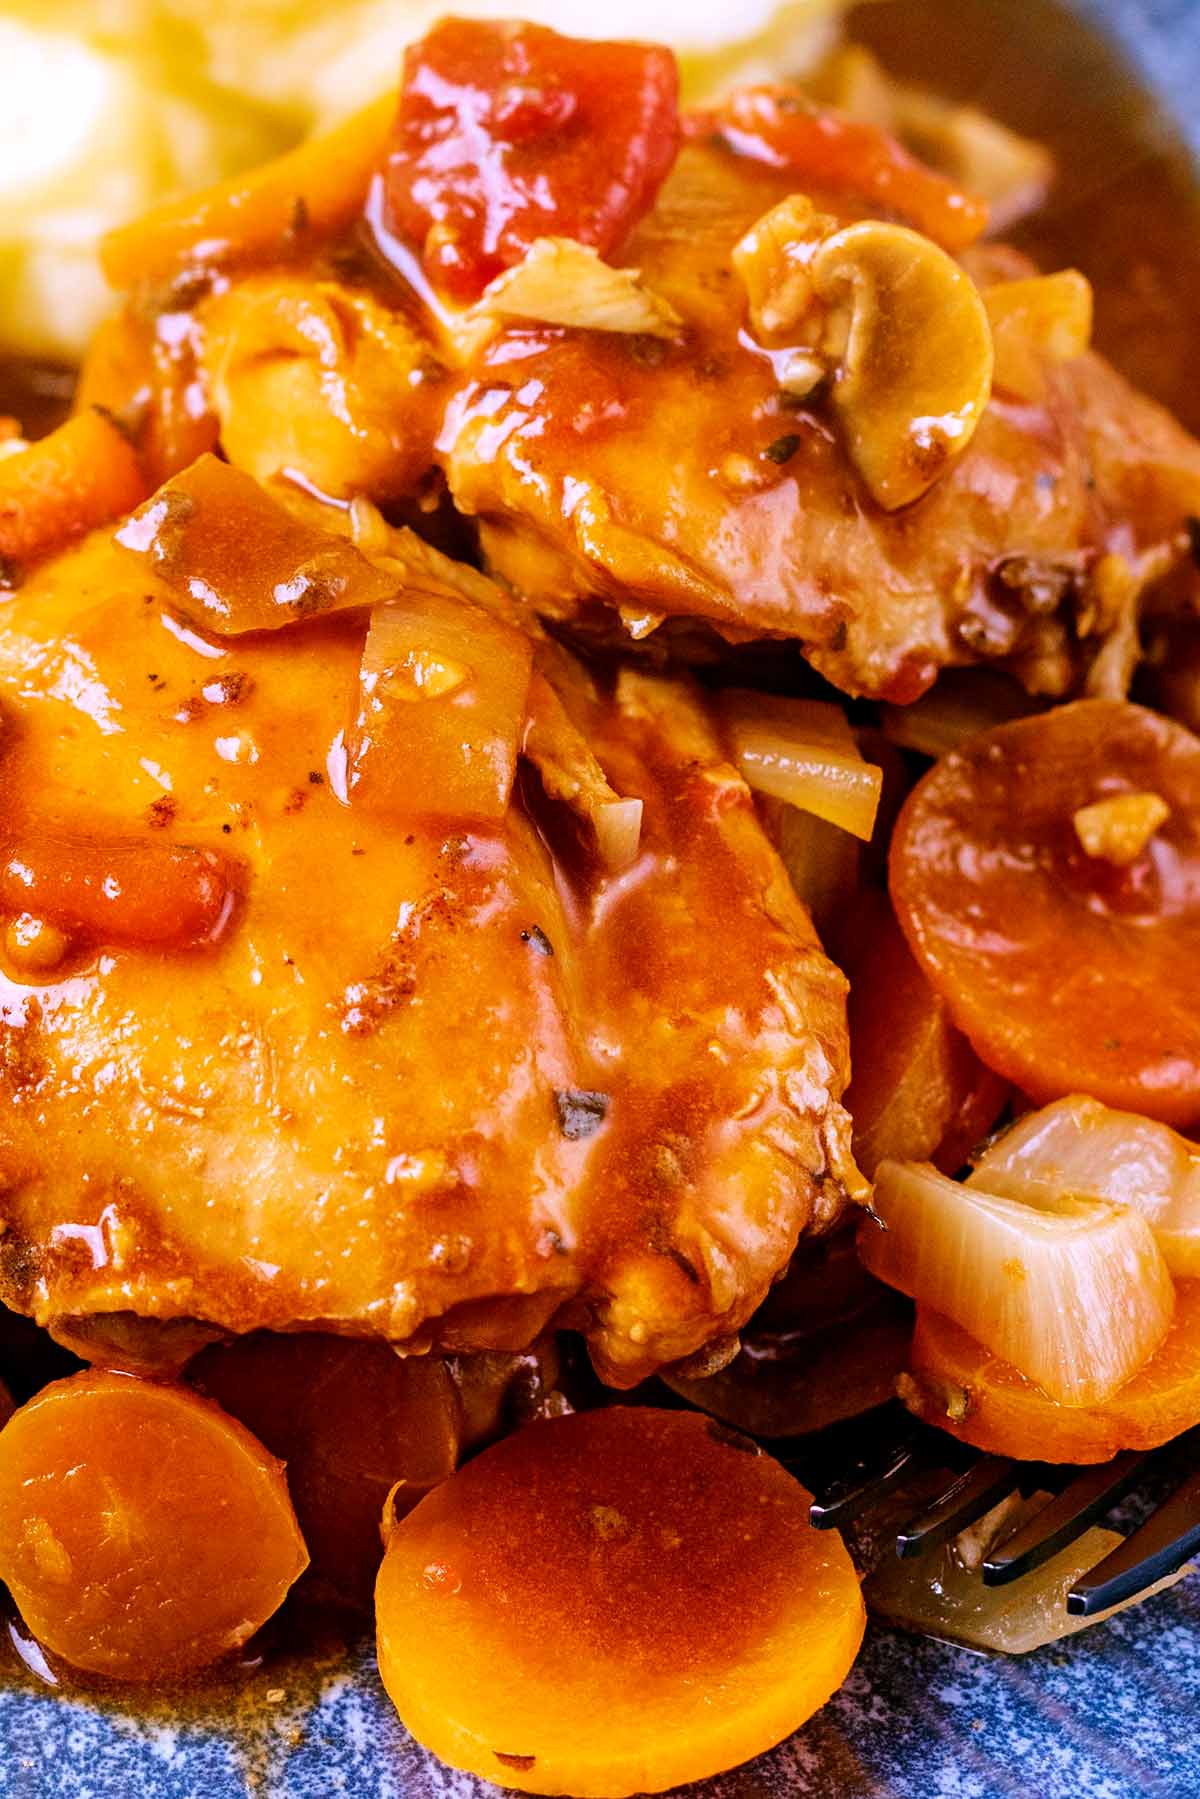 Cooked chicken, carrots and mushrooms in a chasseur sauce.